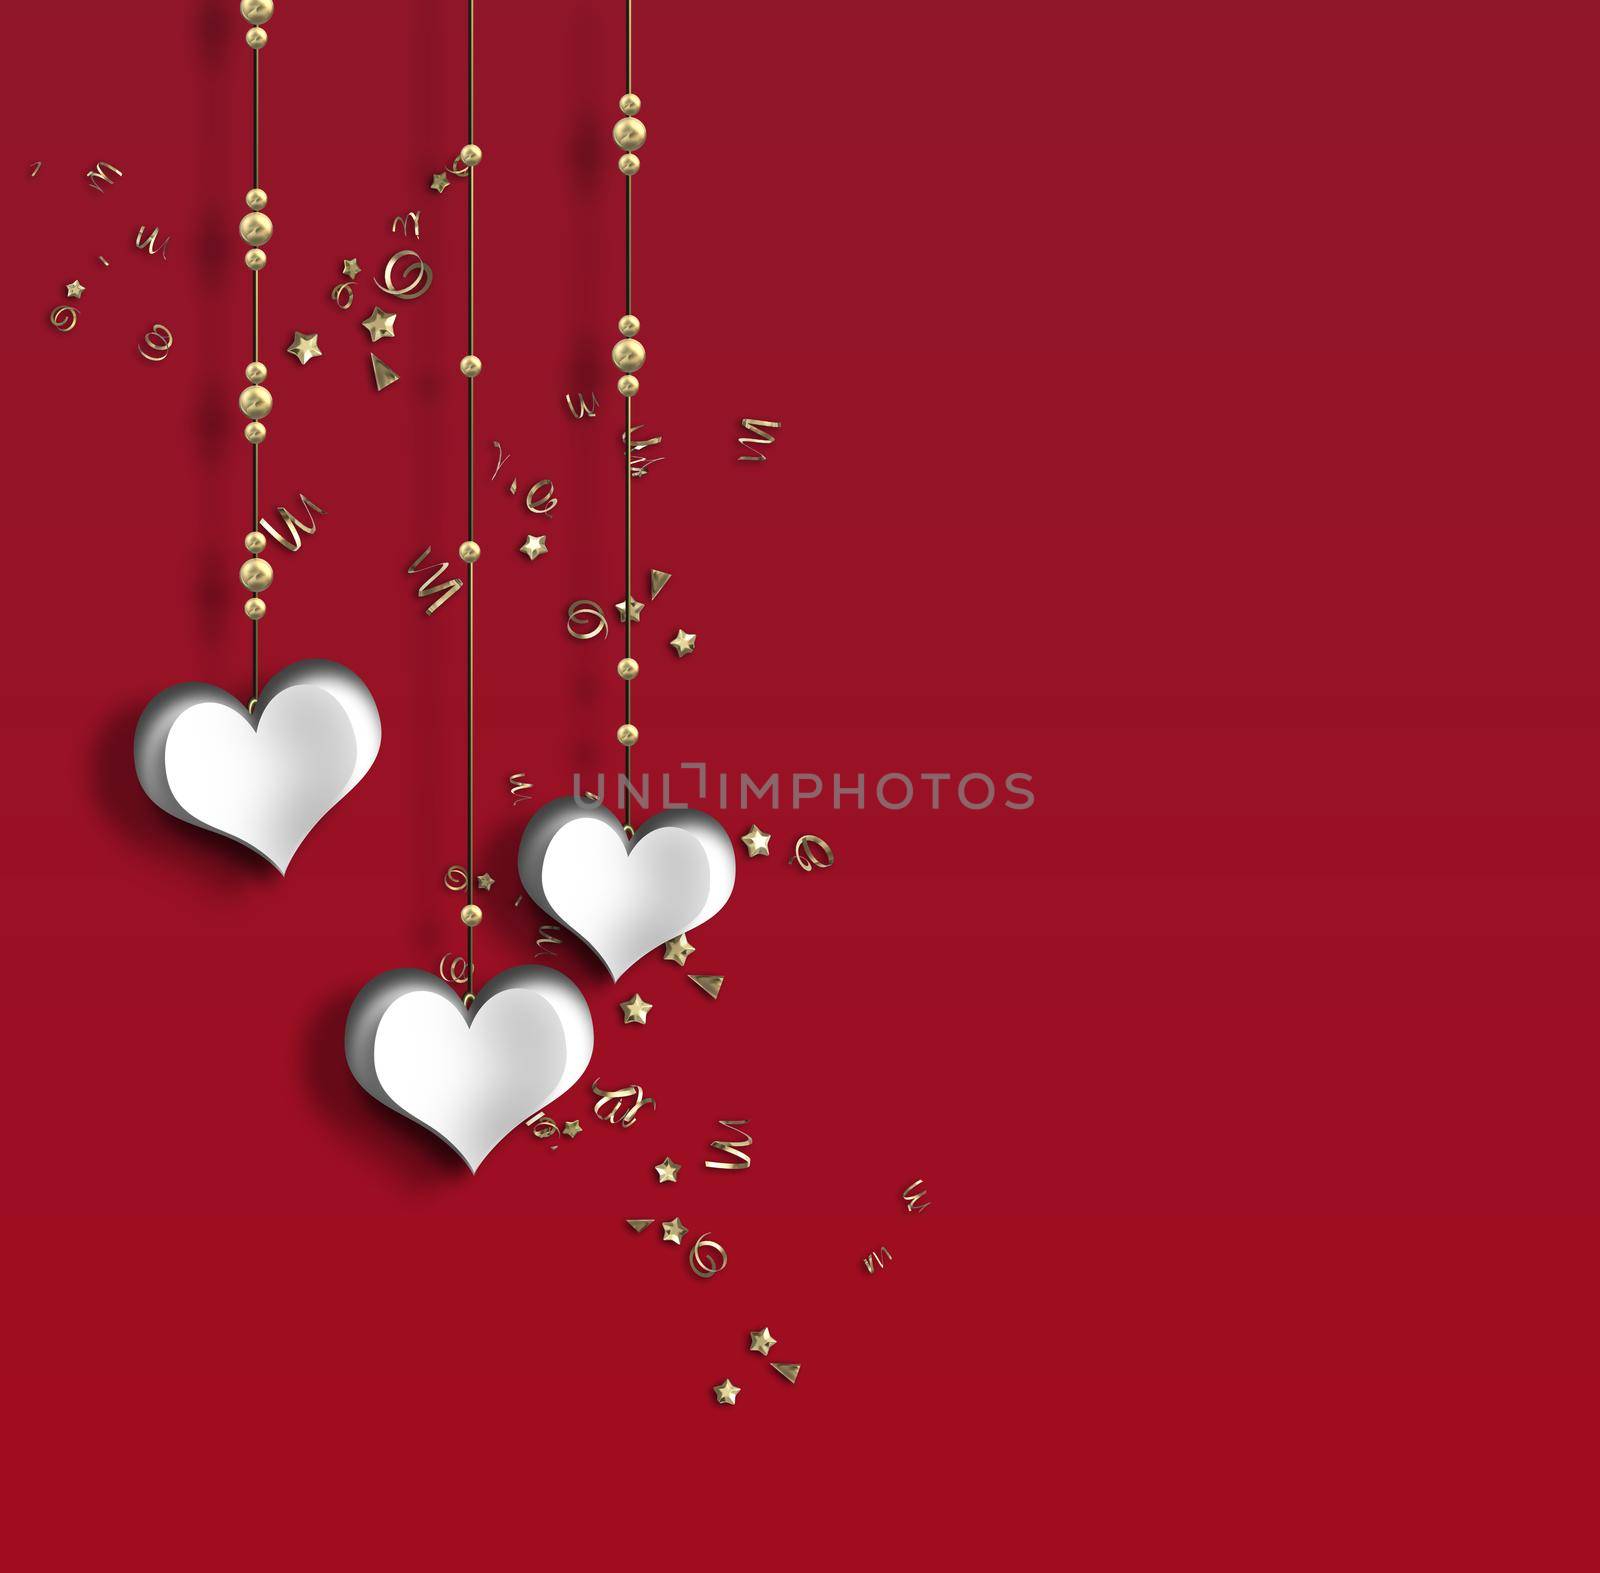 Happy St Valentines Day concept by NelliPolk